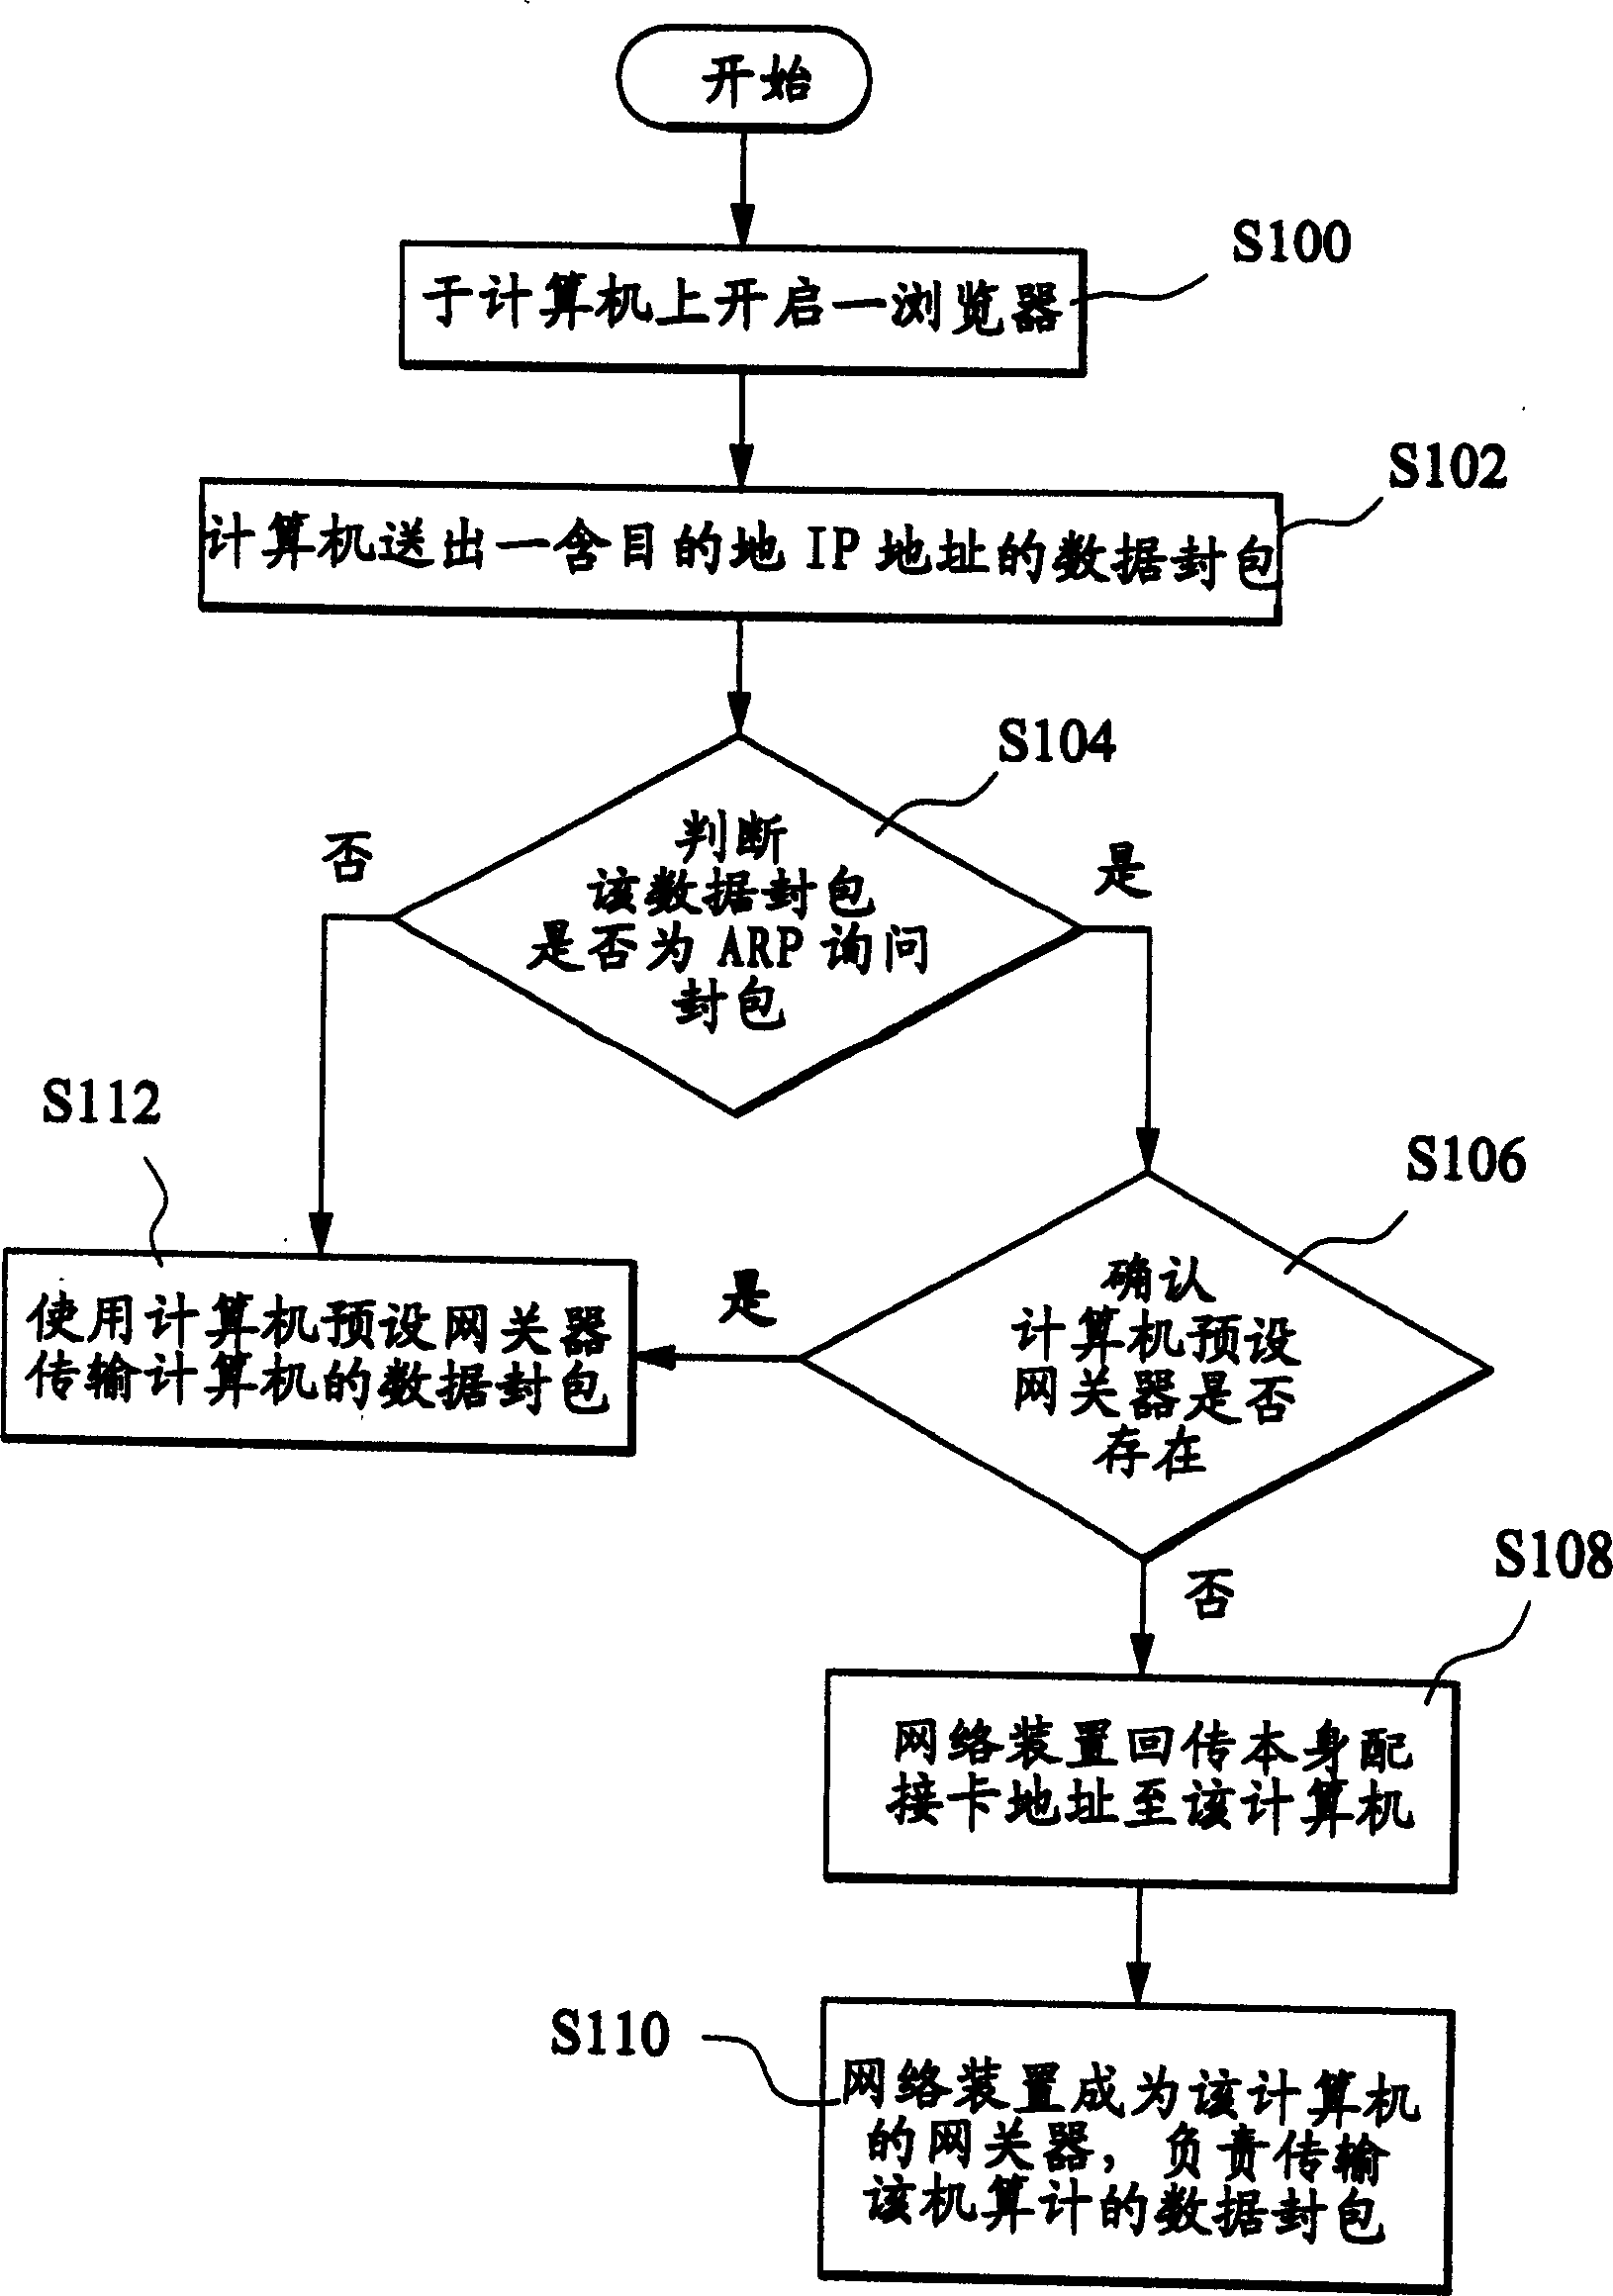 On-line method for IP configuration of set-free network